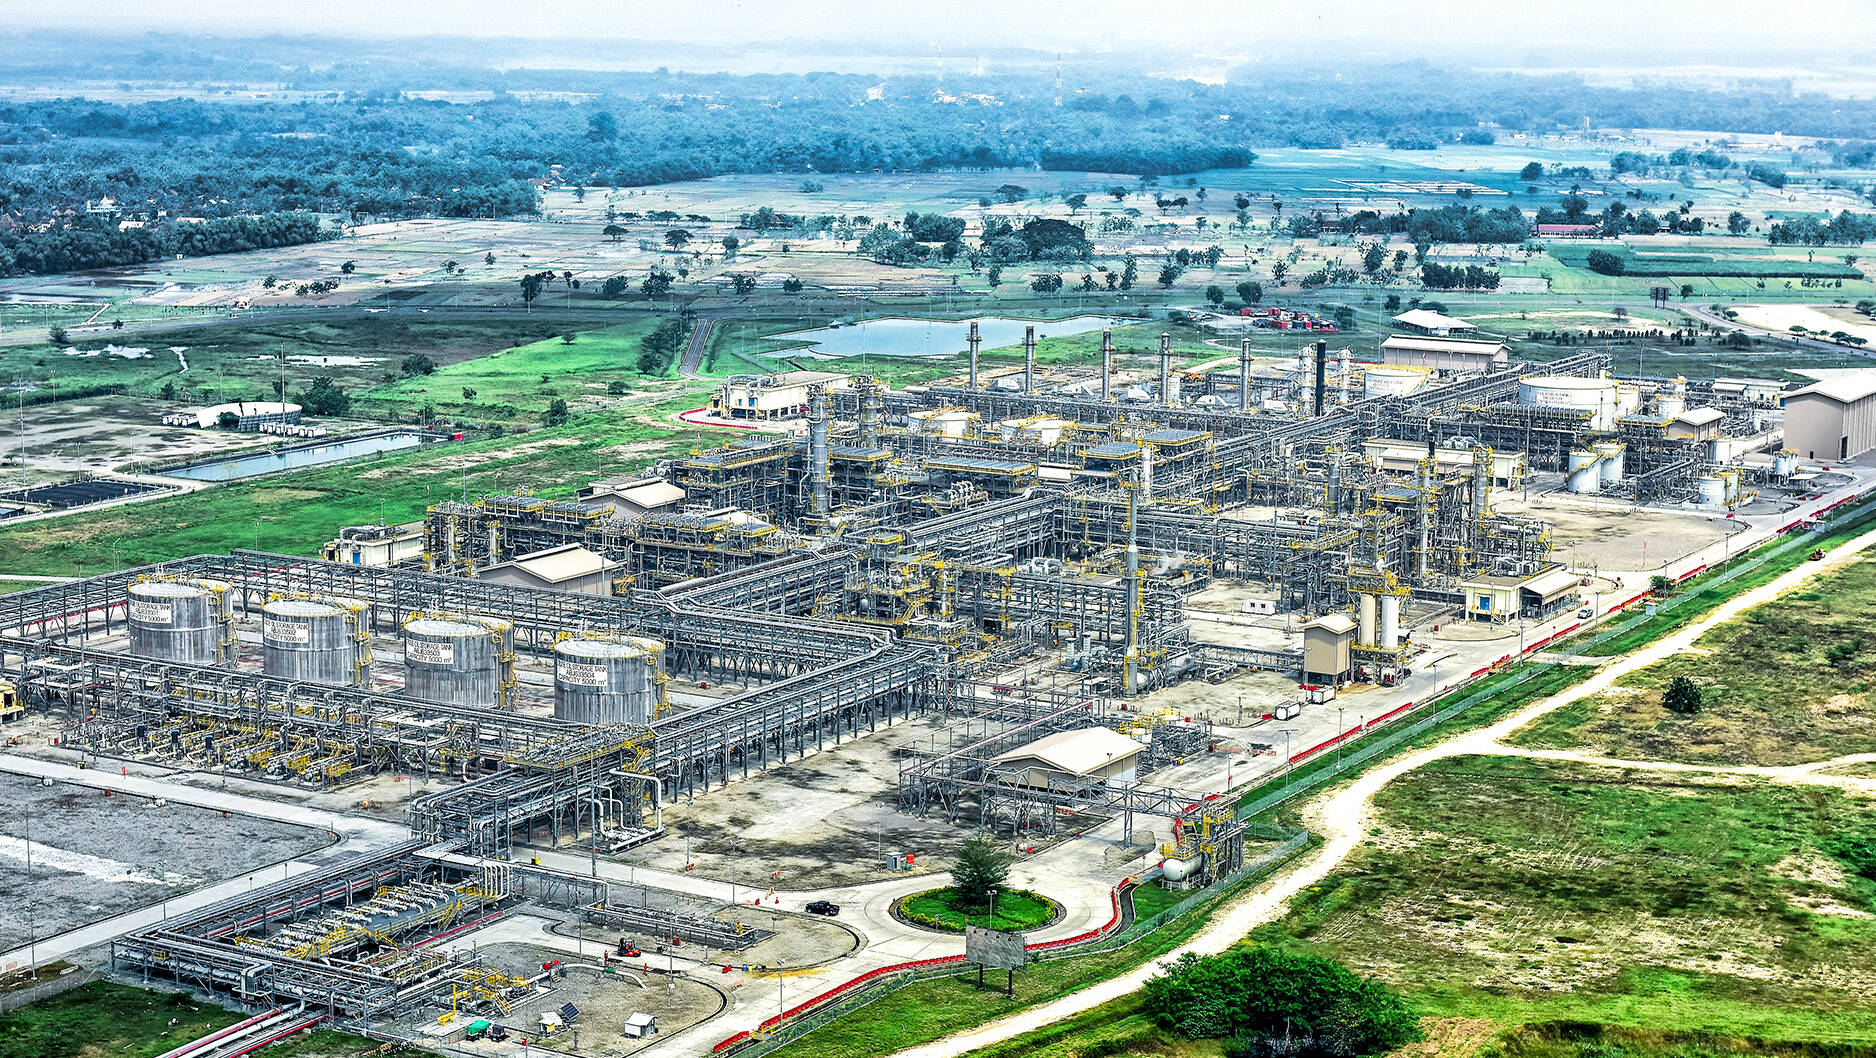 Image Photo  The Central Processing Facility of Banyu Urip field located in Bojonegoro, East Java.